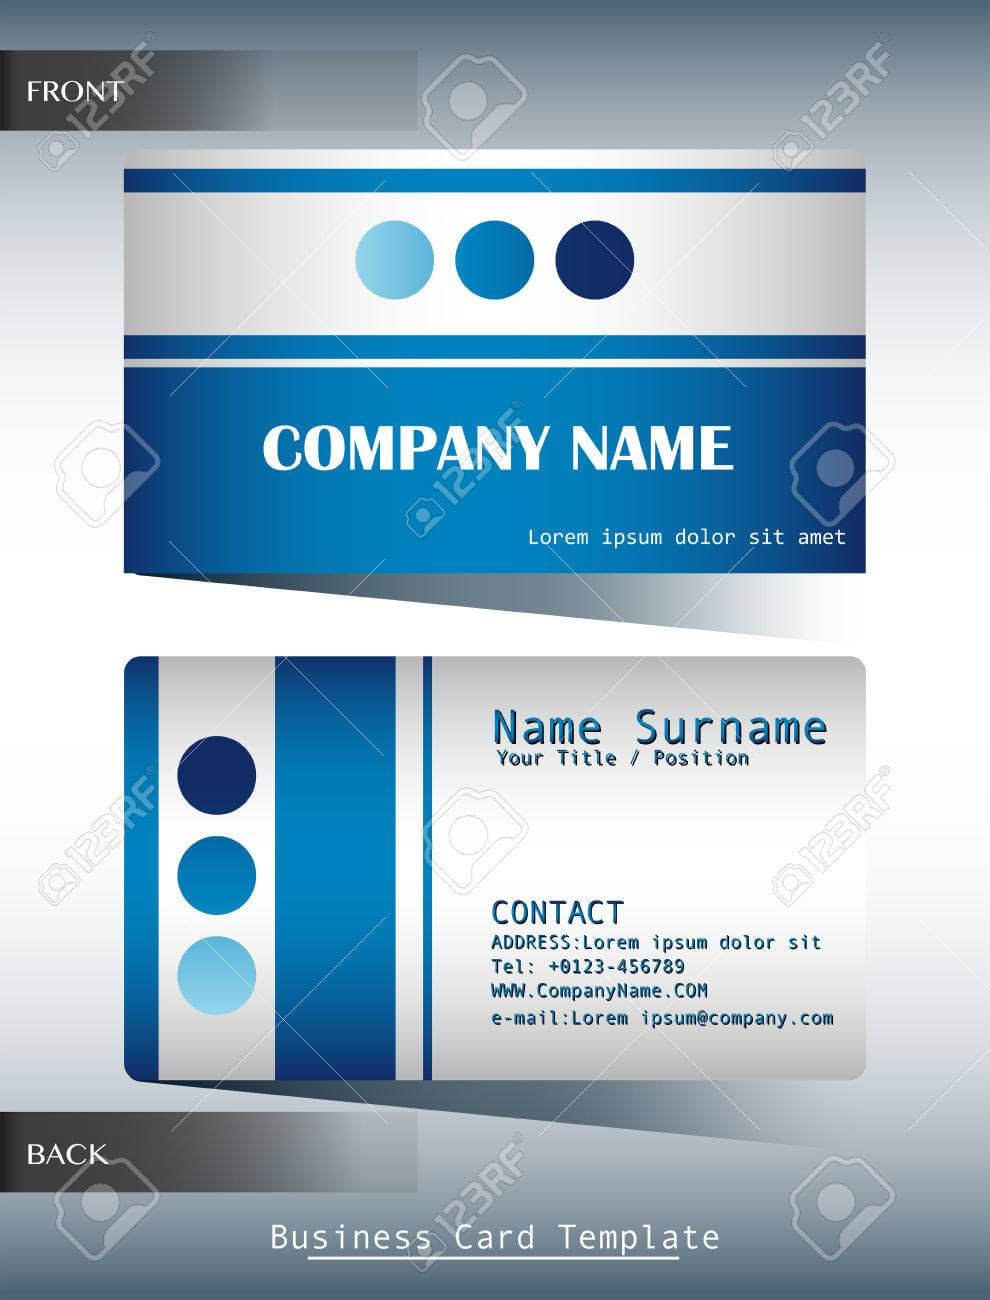 A Blue And Grey Calling Card Template Regarding Template For Calling Card